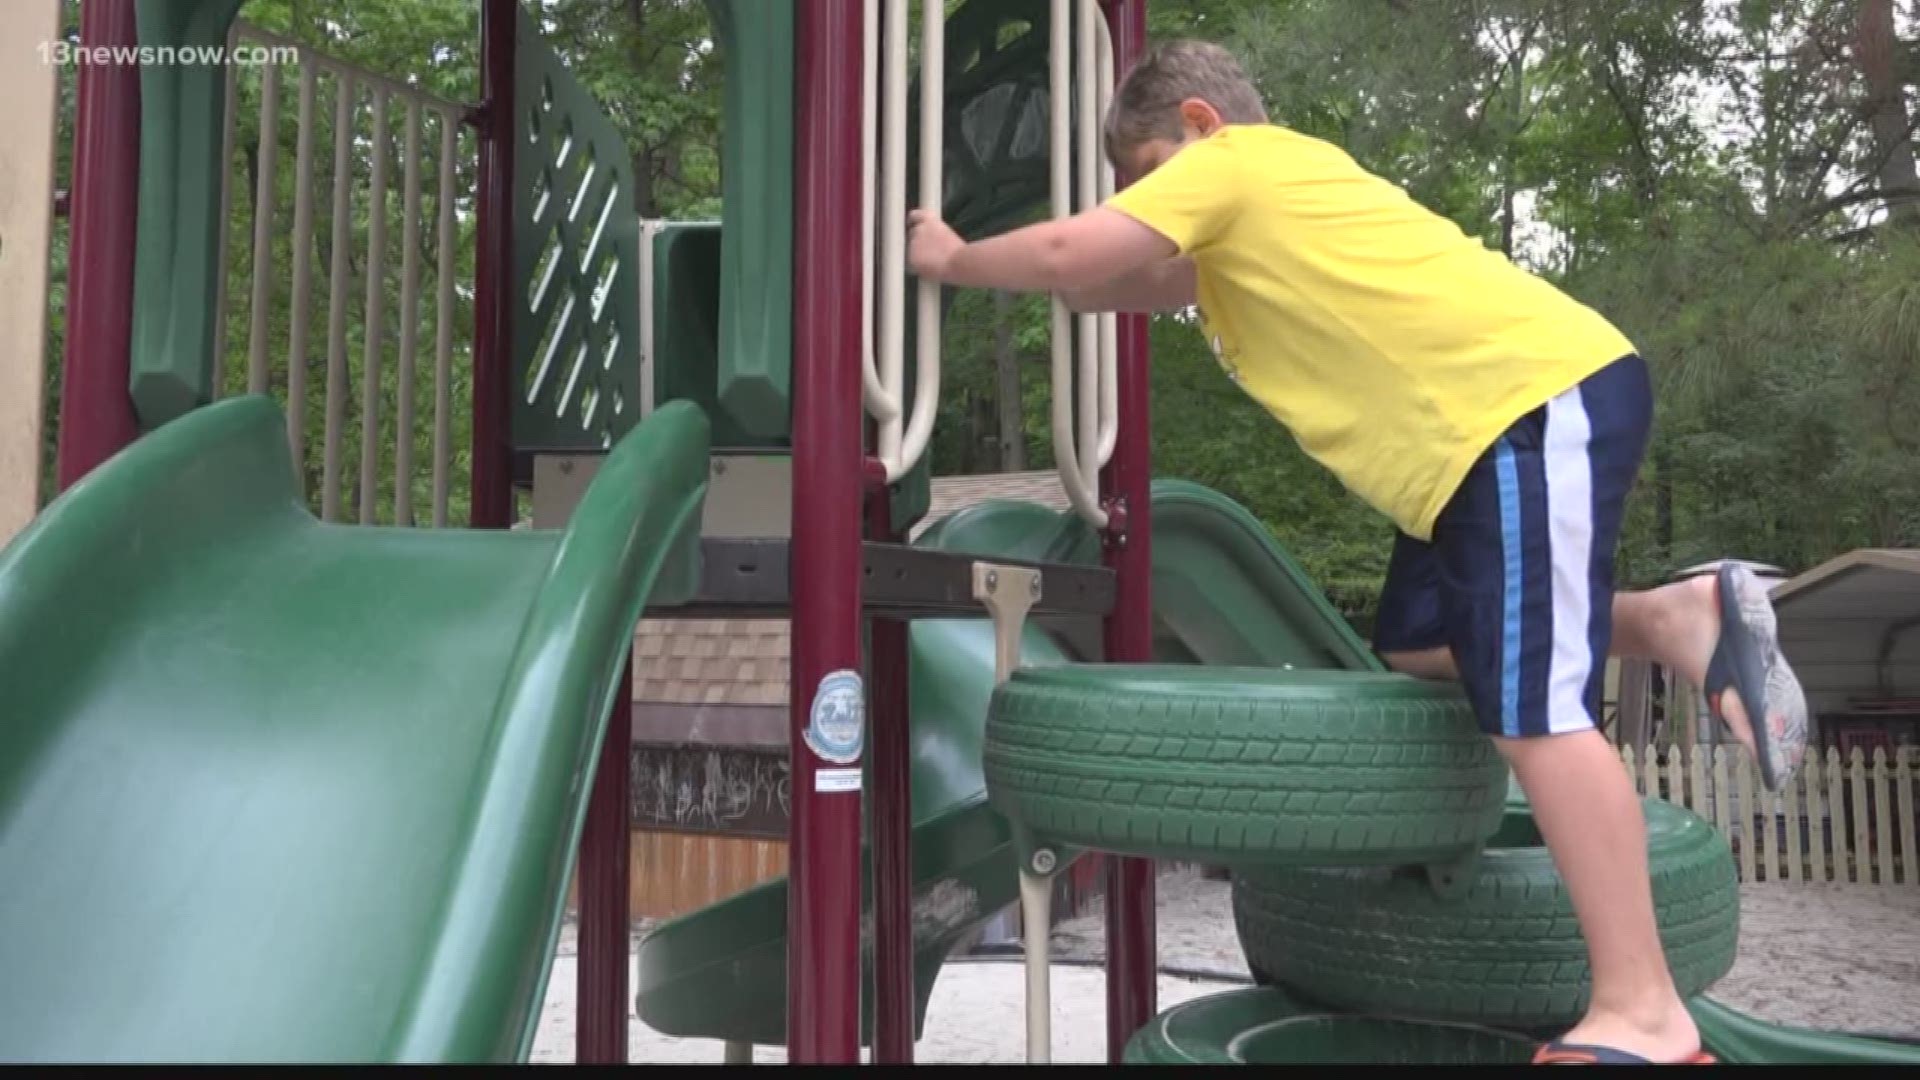 Elementary school students in York County could soon be given a lot more time out on the playground.